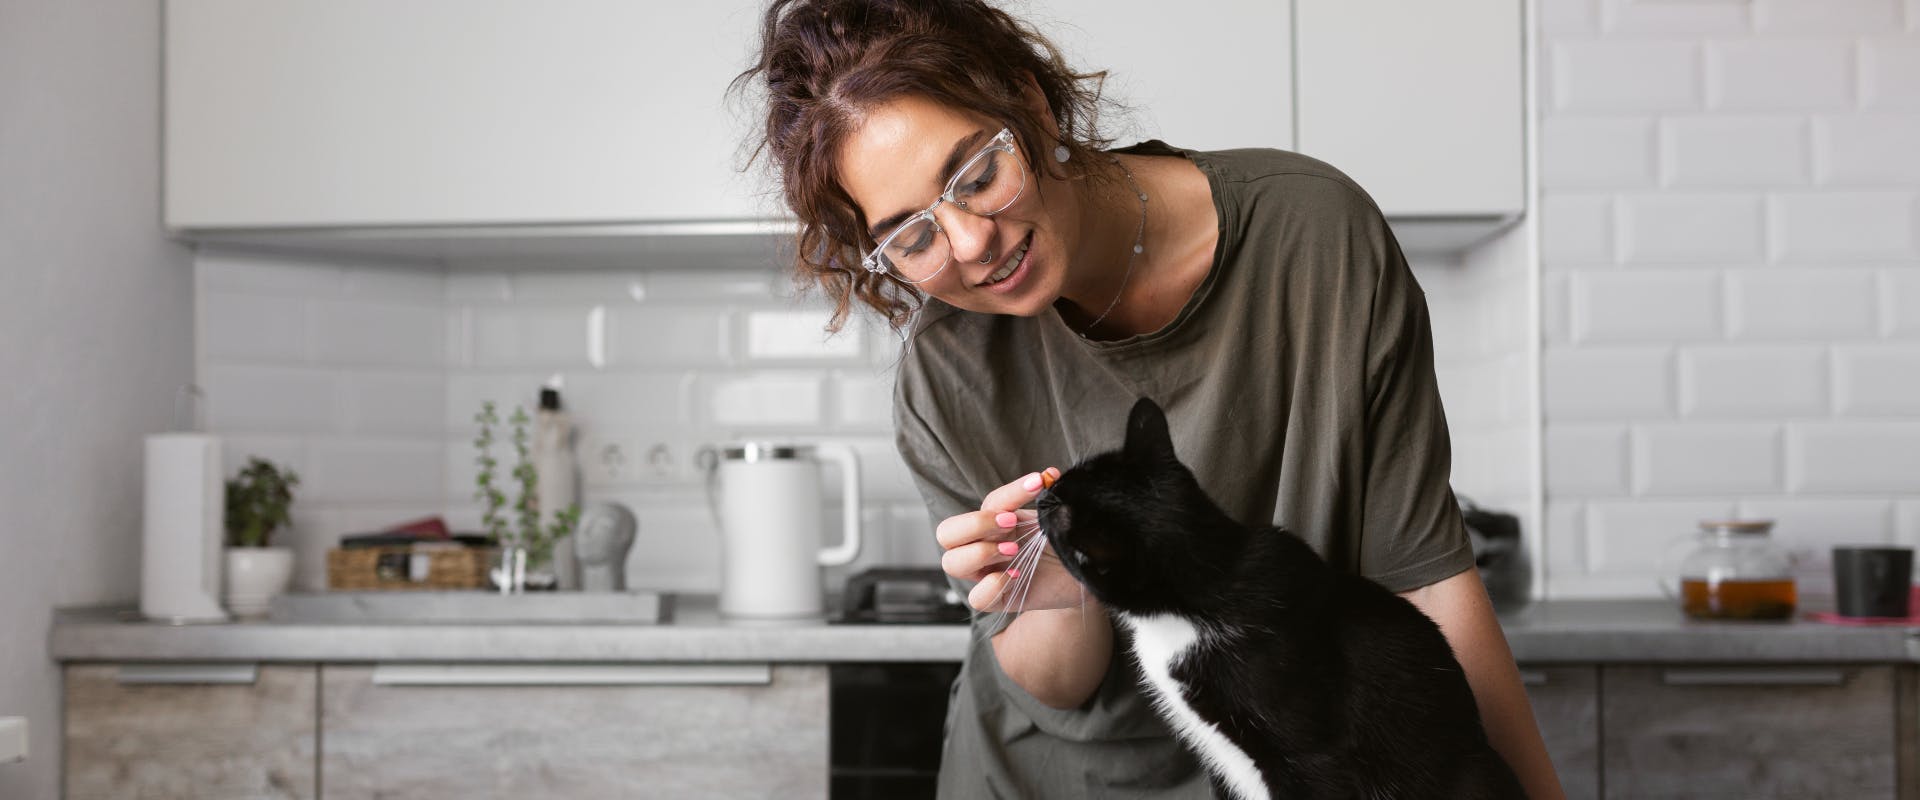 A woman feeding a cat in the kitchen.